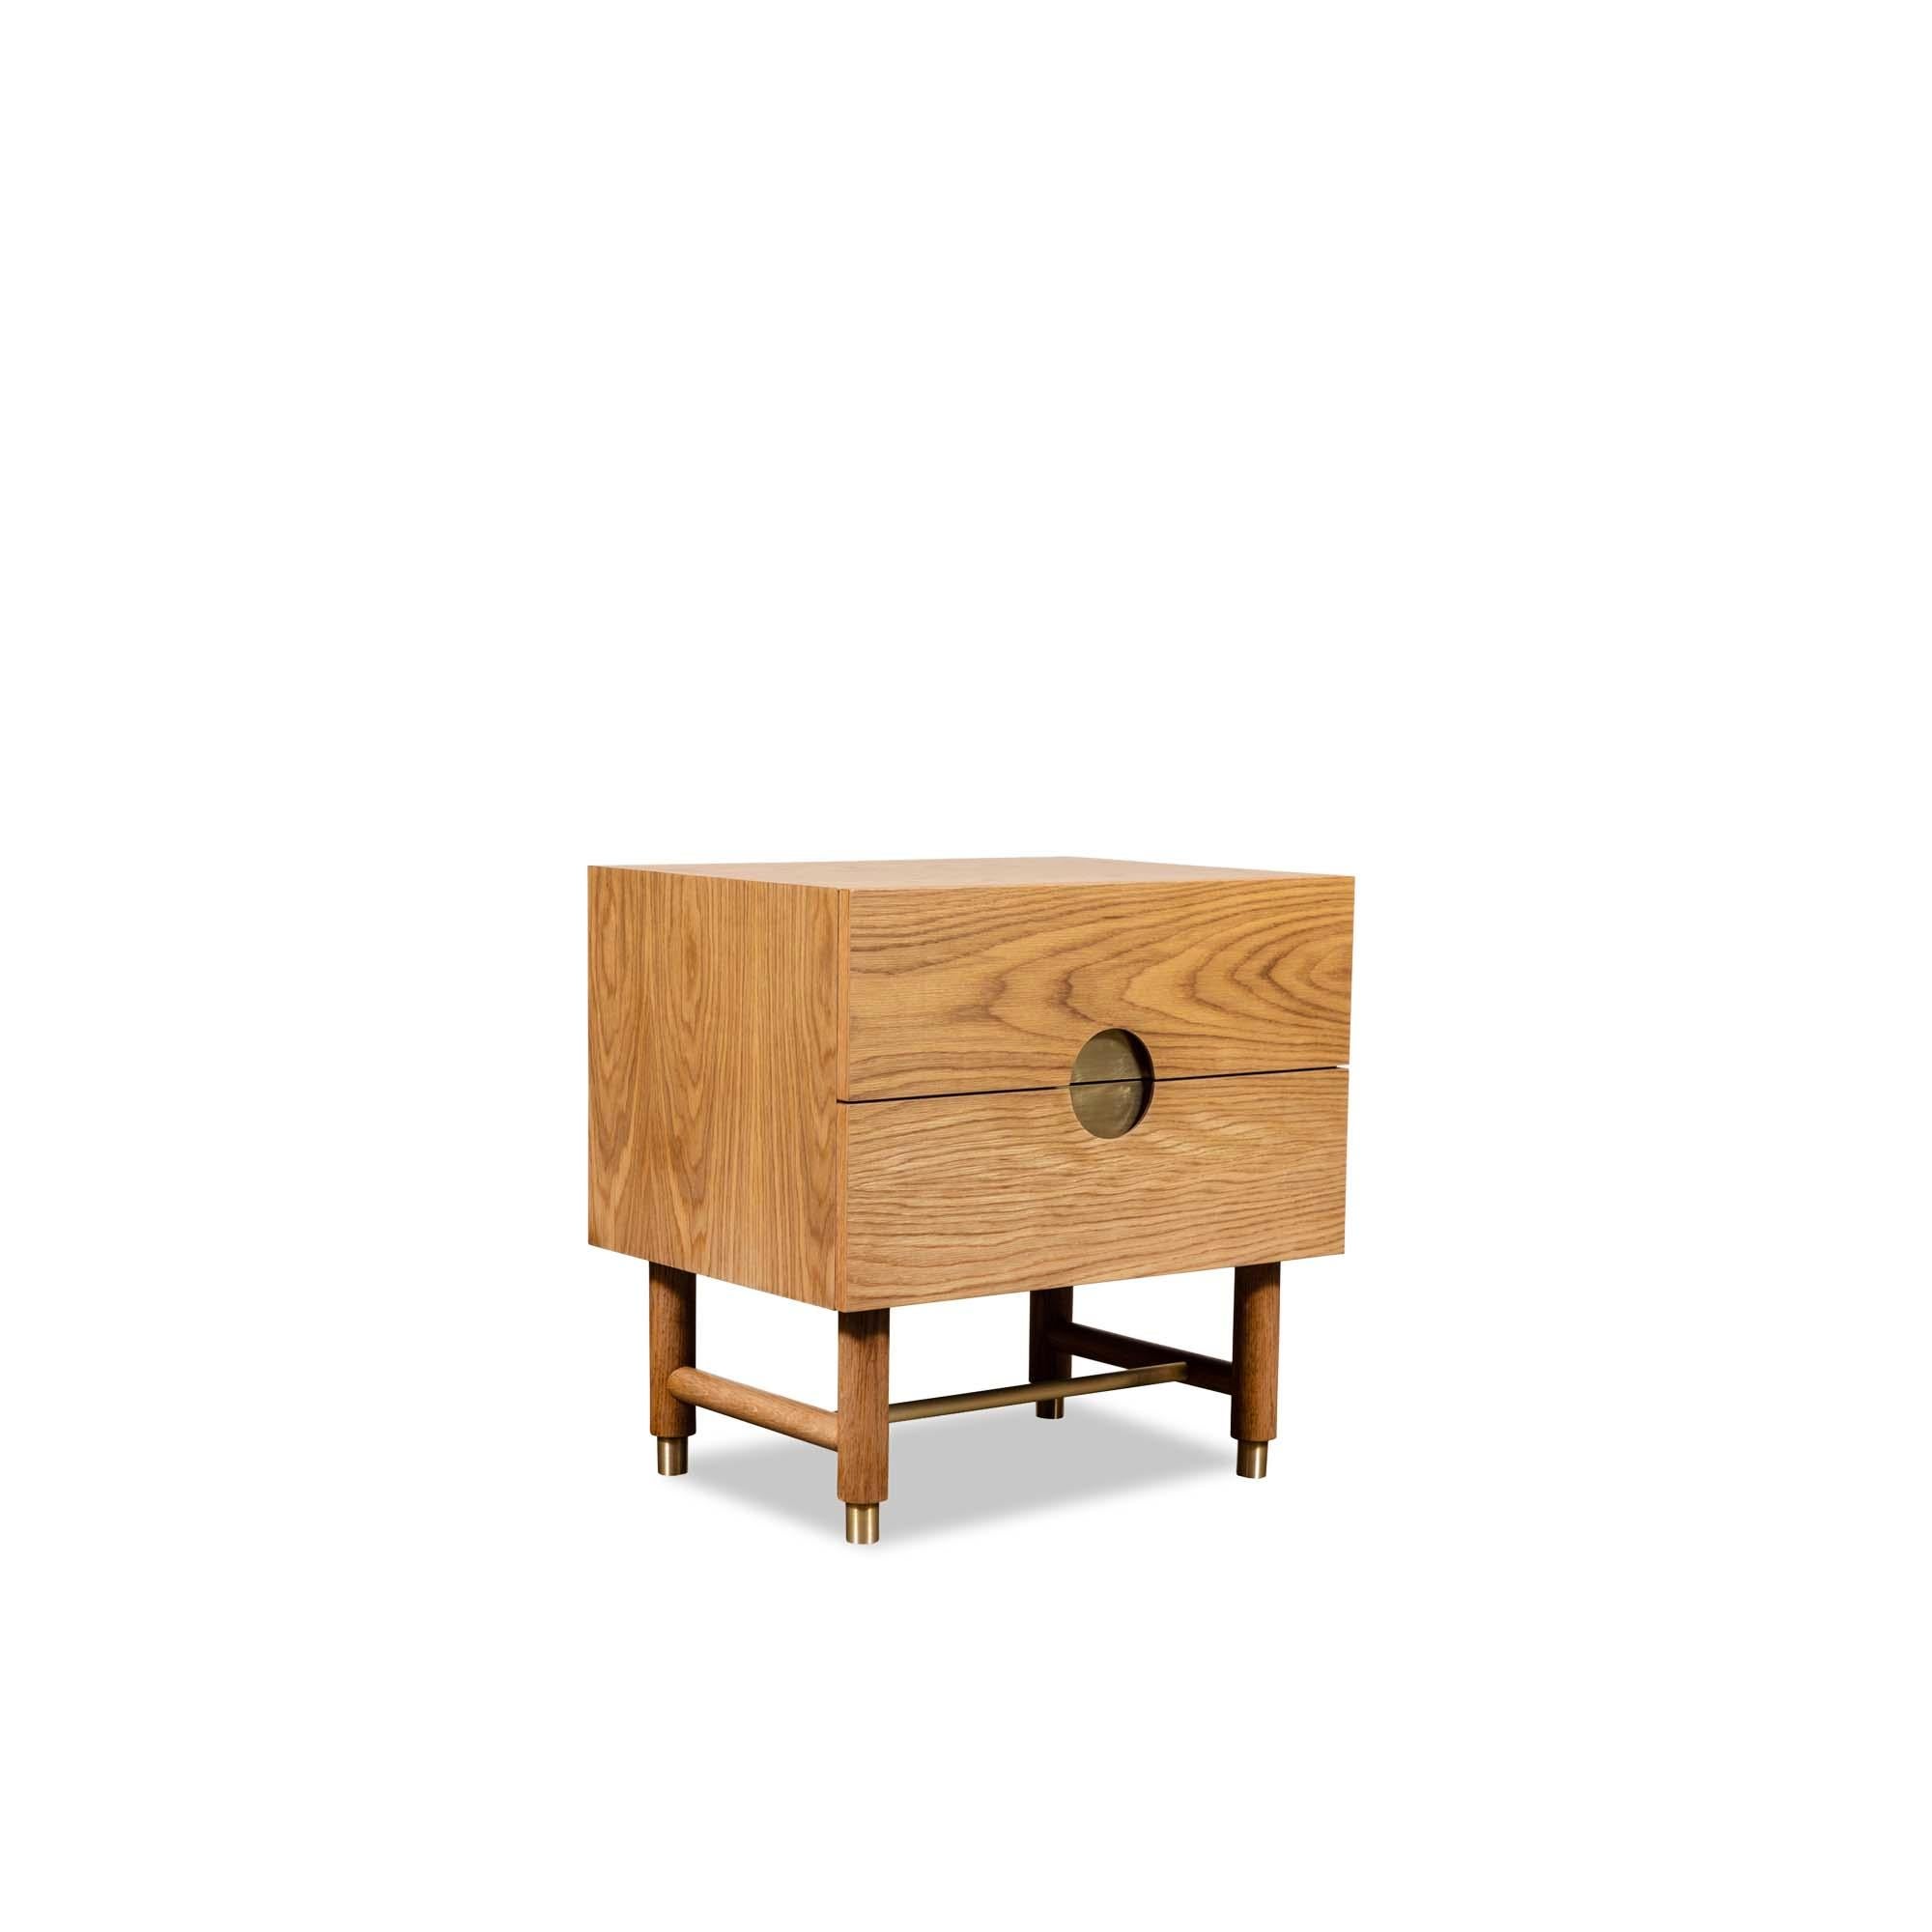 The Niguel Nightstand features two drawers. Details include leveling brass cap feet, a brass stretcher on the base, lacquered interior and inset brass hardware. Shown here in oiled oak.

The Lawson-Fenning Collection is designed and handmade in